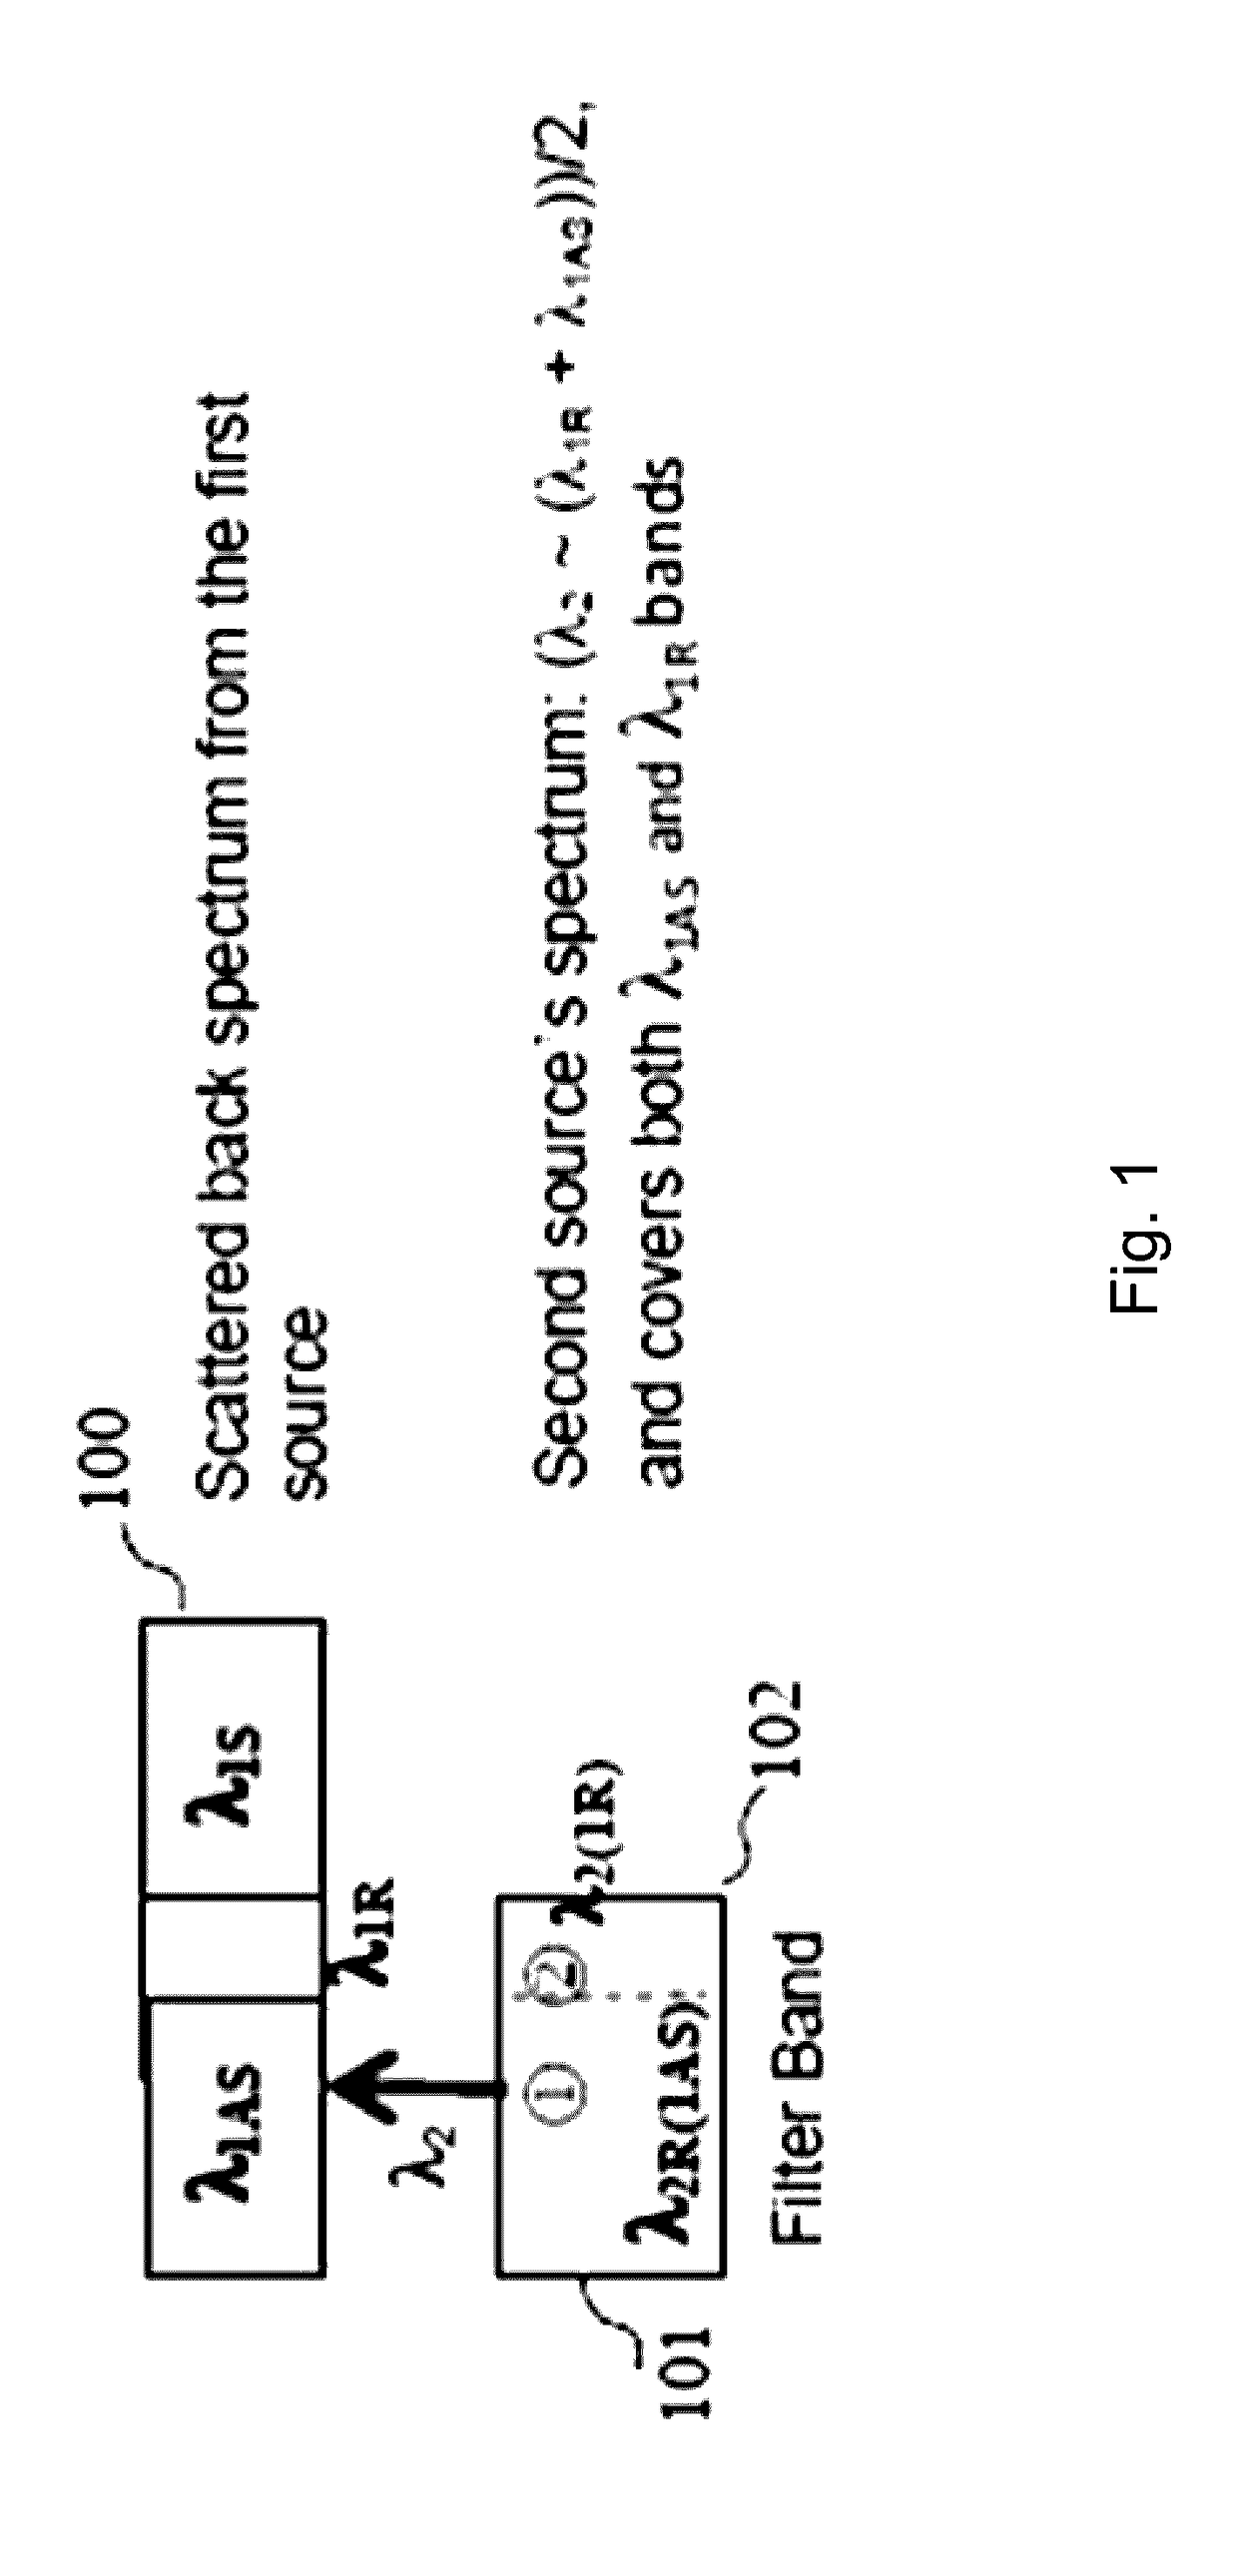 Method and apparatus for auto-correcting the distributed temperature sensing system